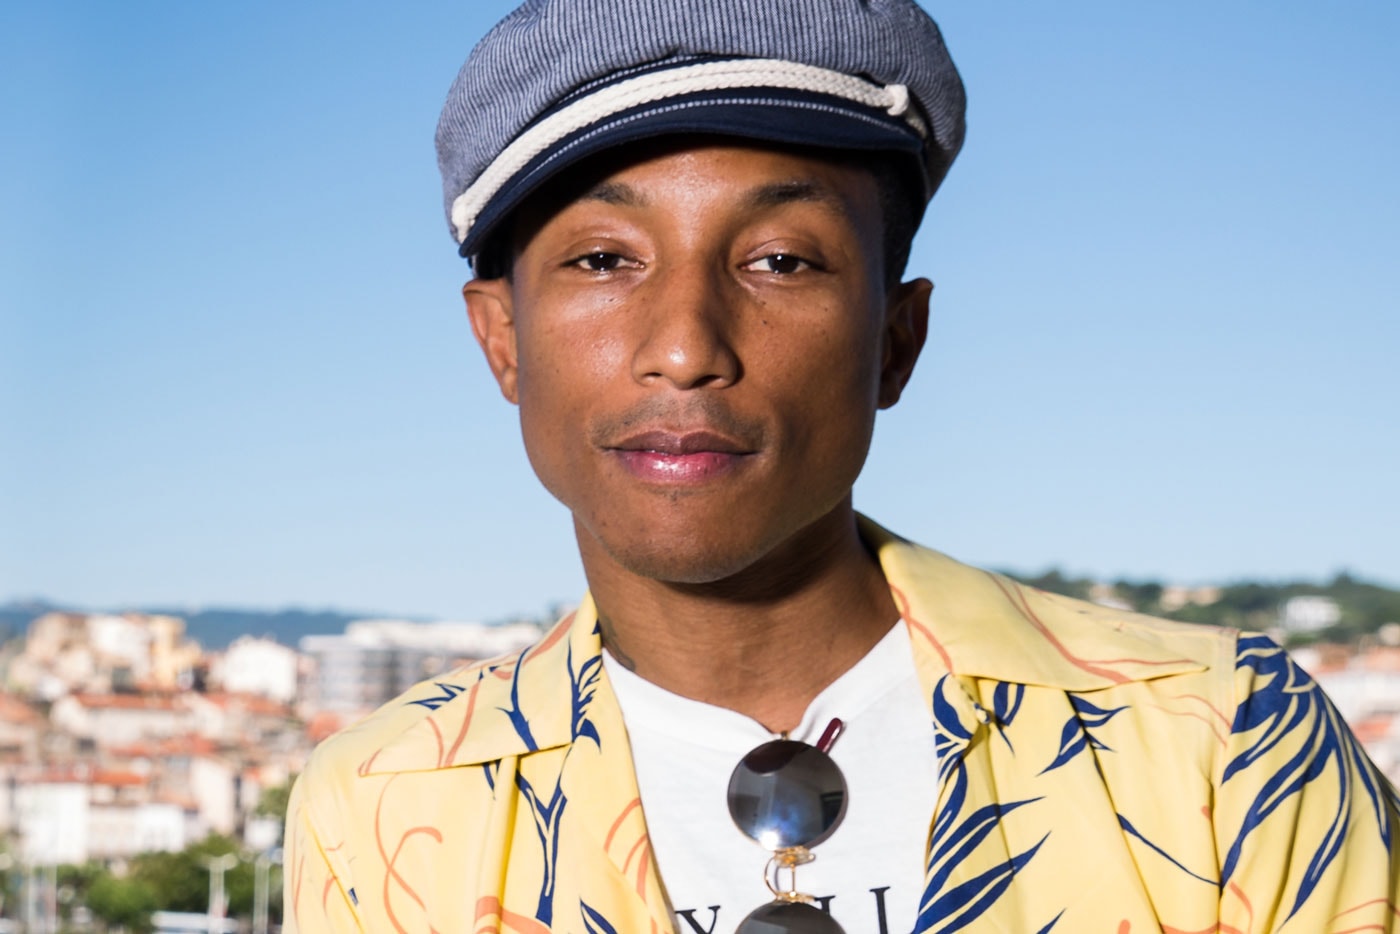 Check out Pharrell's OTHERtone Episode 3 